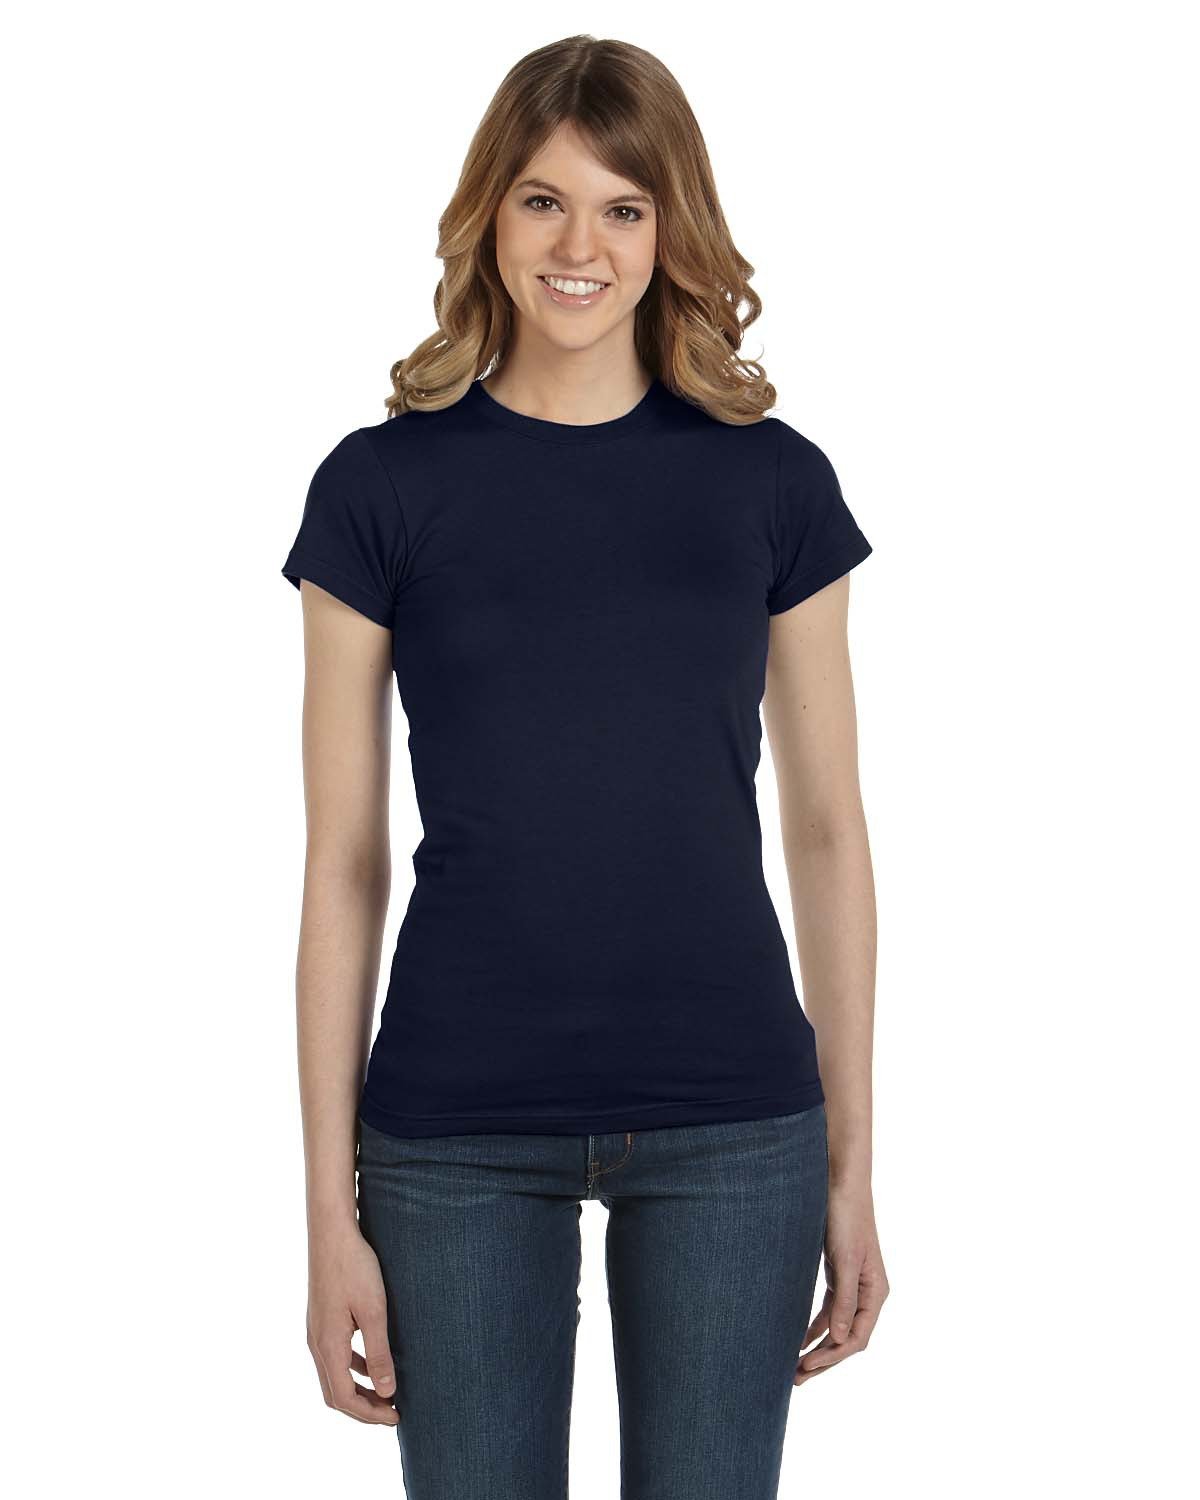 Anvil Ladies' Lightweight Fitted T-Shirt NAVY 